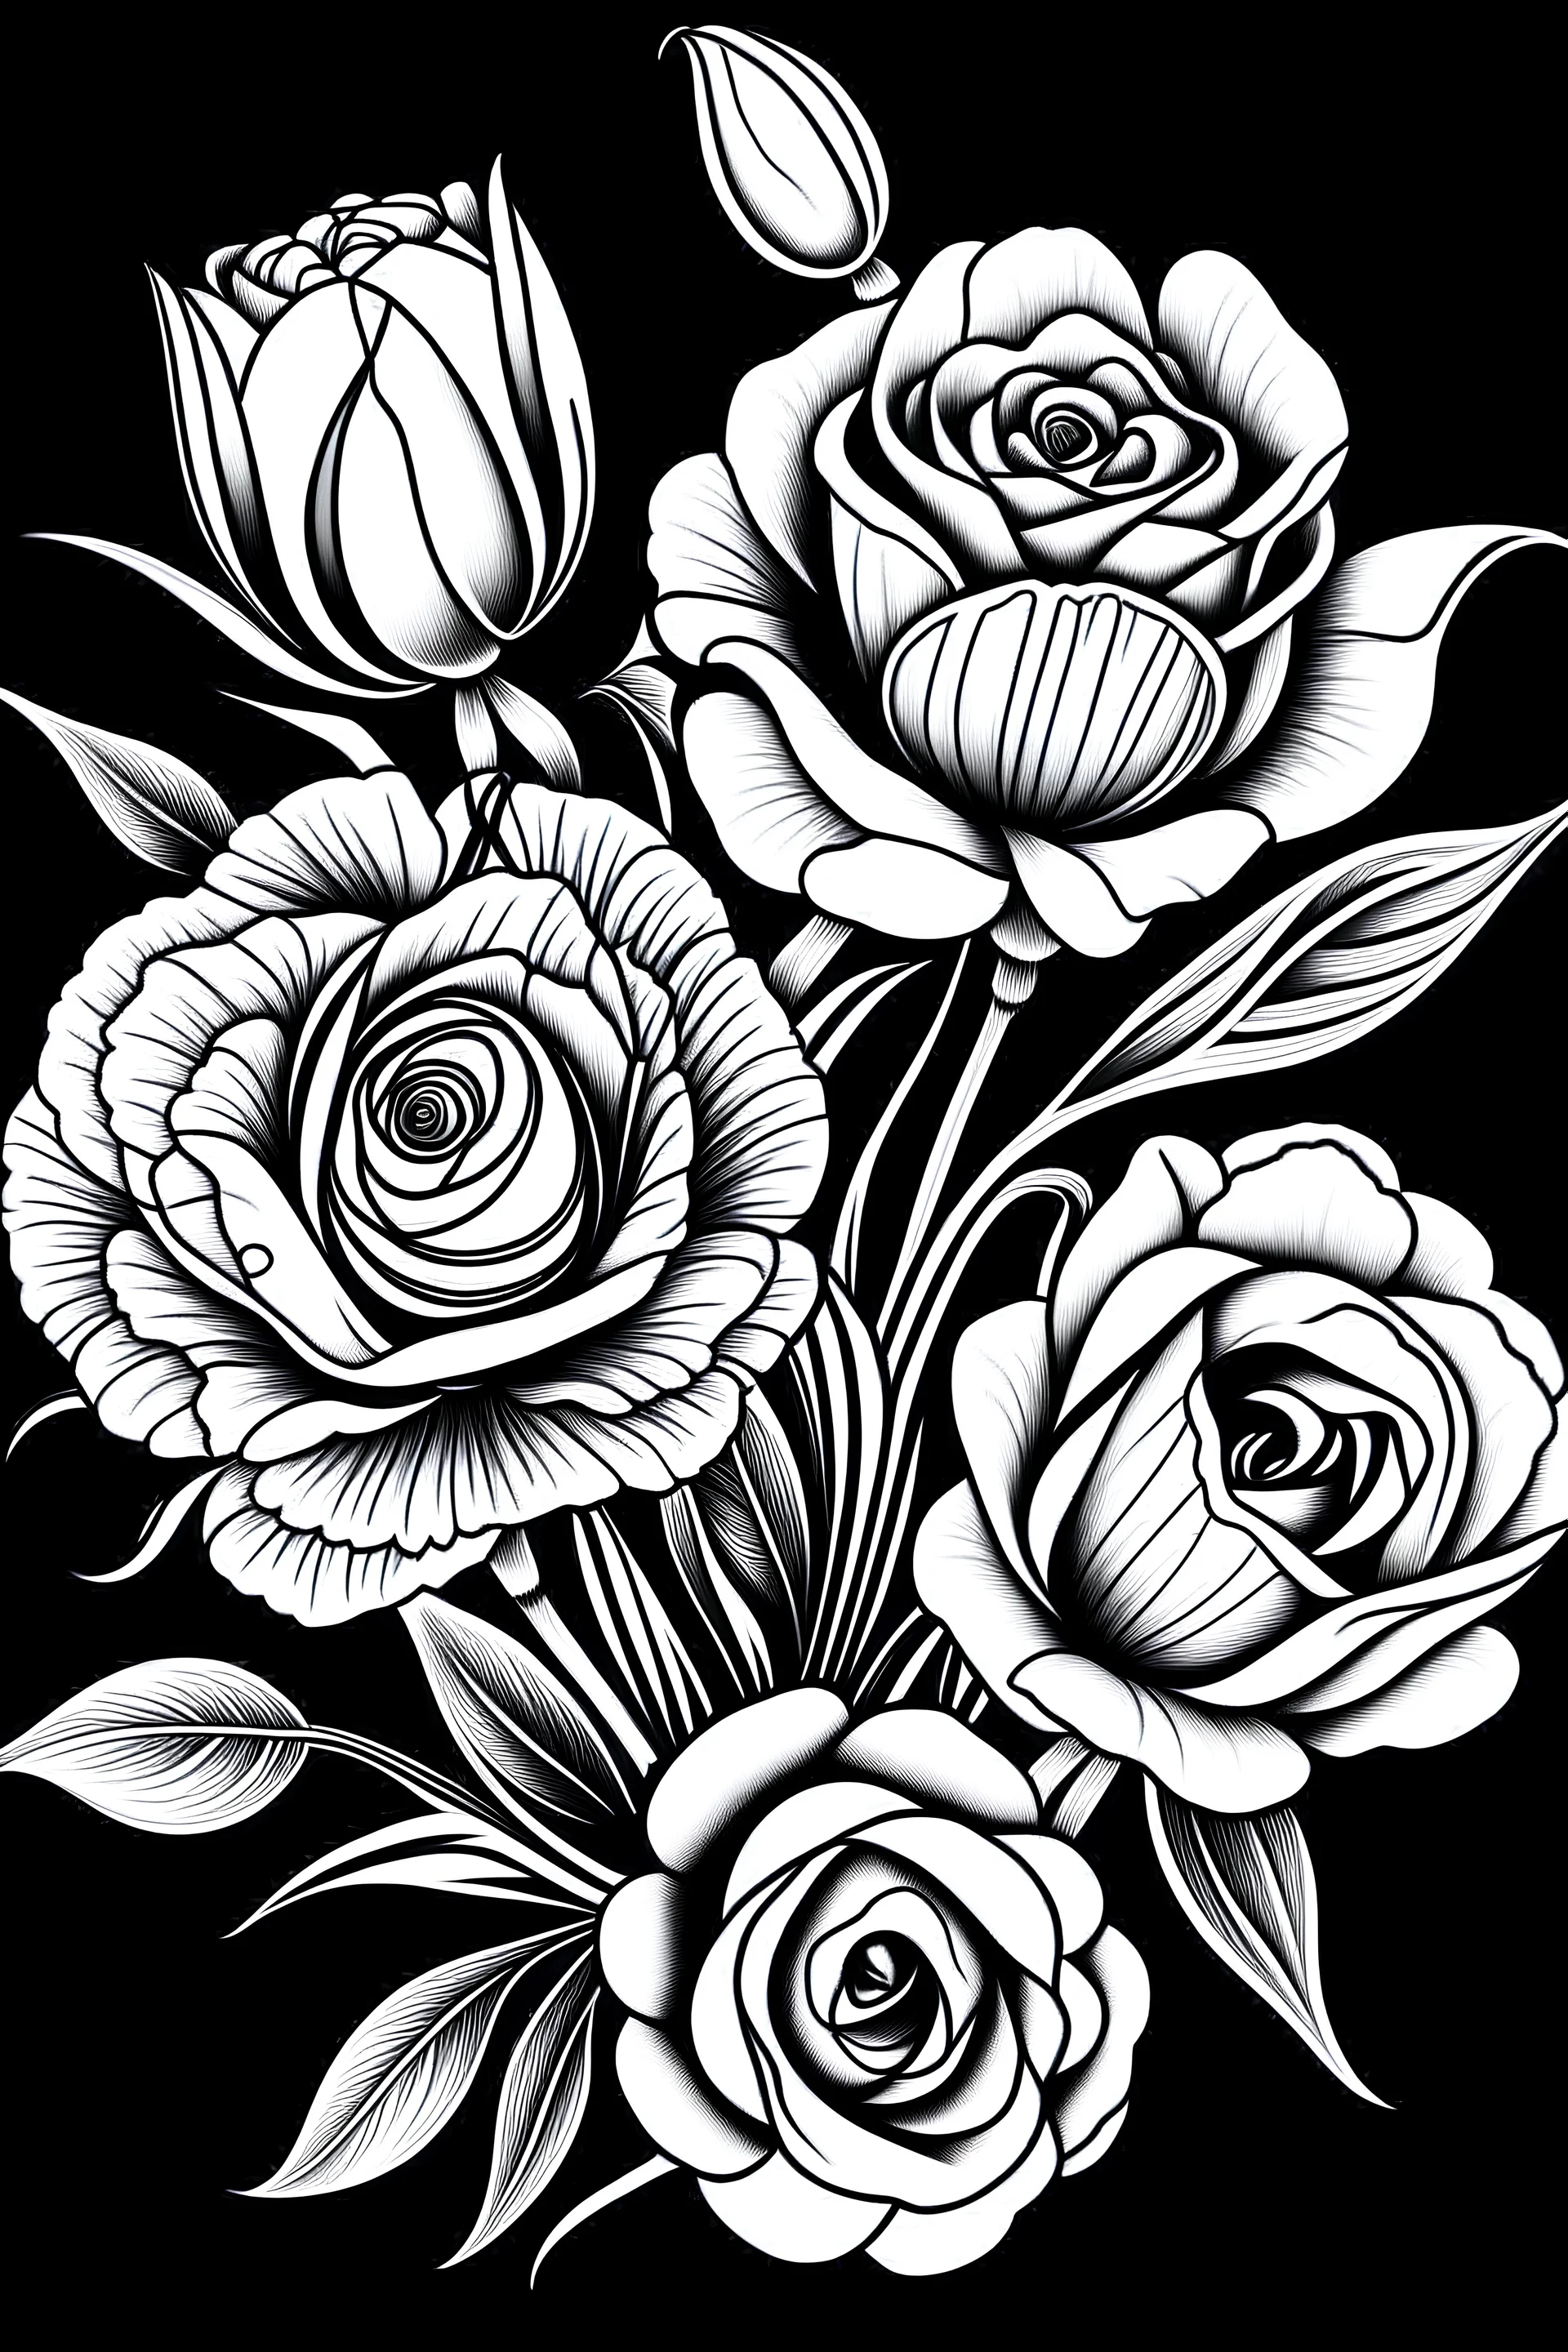 Create a black and white image of roses and tulips with a white background. This image is intended to be colored in by an adult, so use the colors black and white accordingly